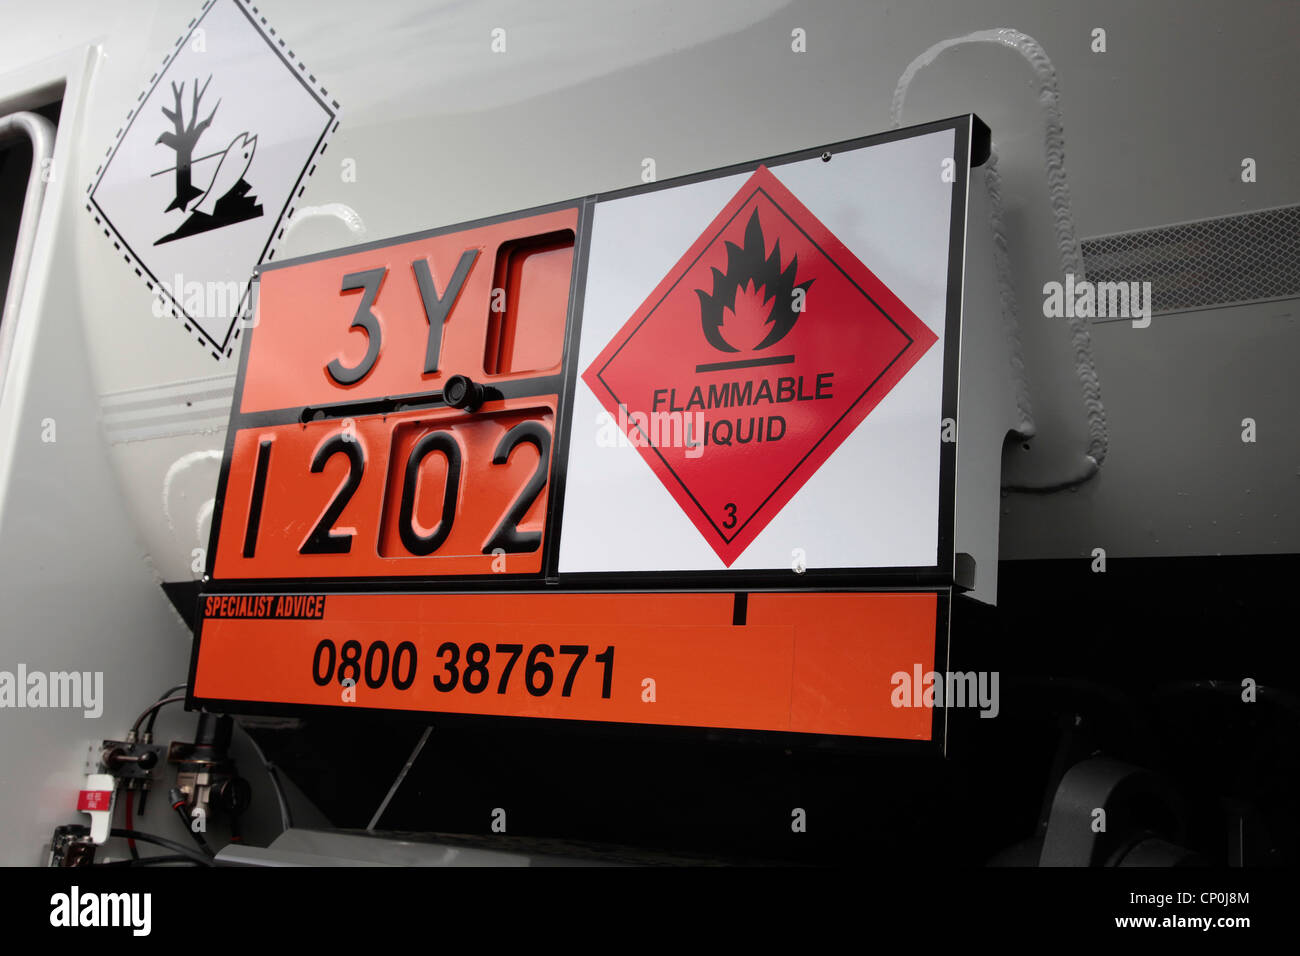 Safety sign on an Oil Tanker showing flammable liquid Stock Photo